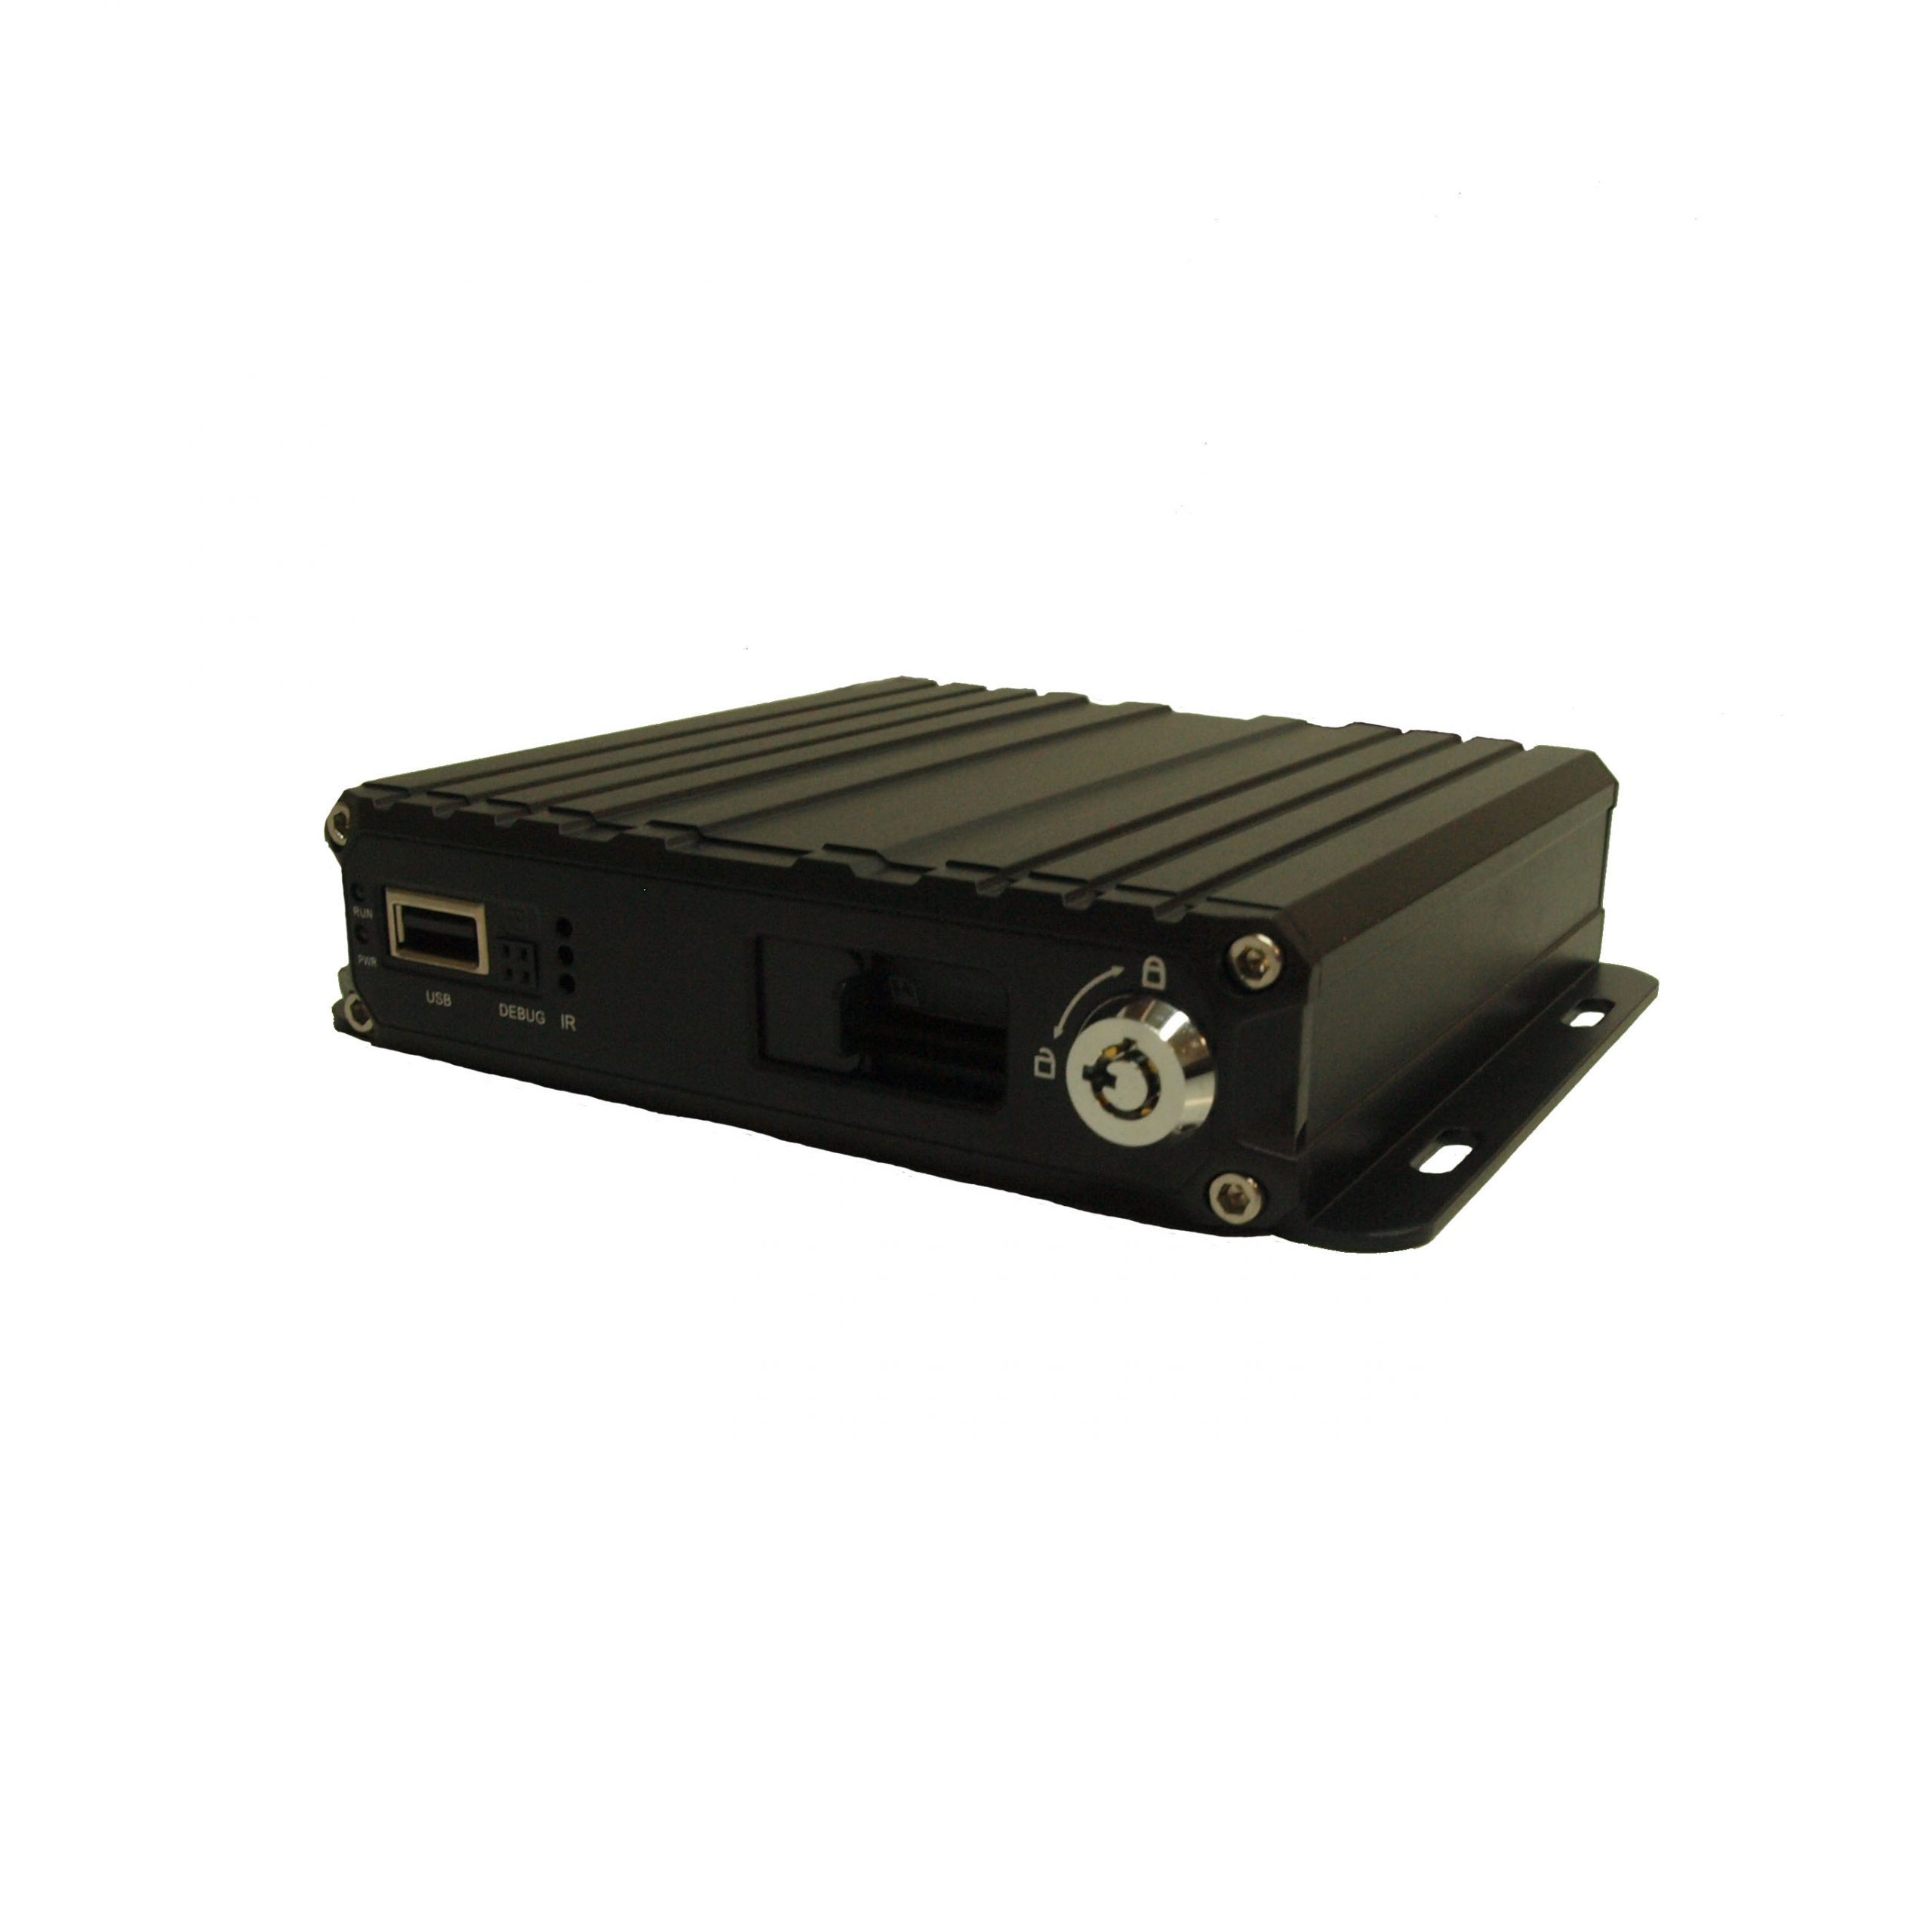 Image of an MS585 Digital Video Recorder